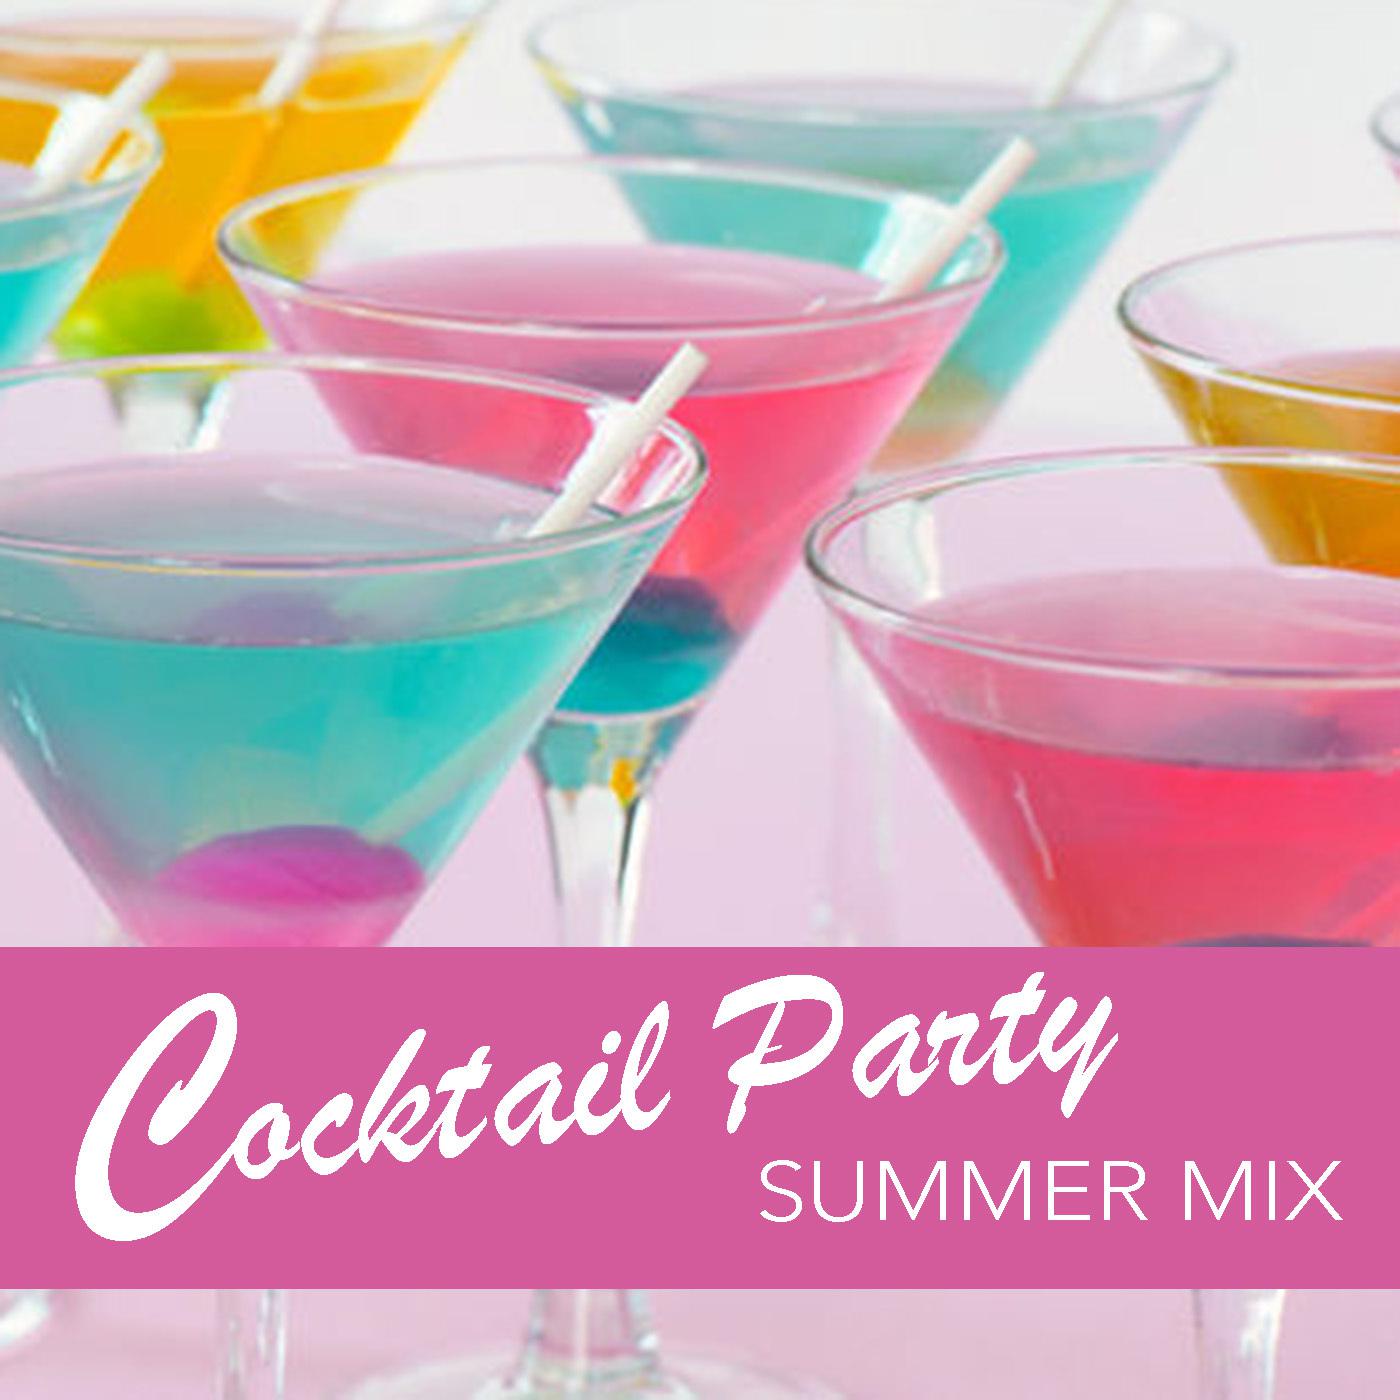 Cocktail Party Summer Mix